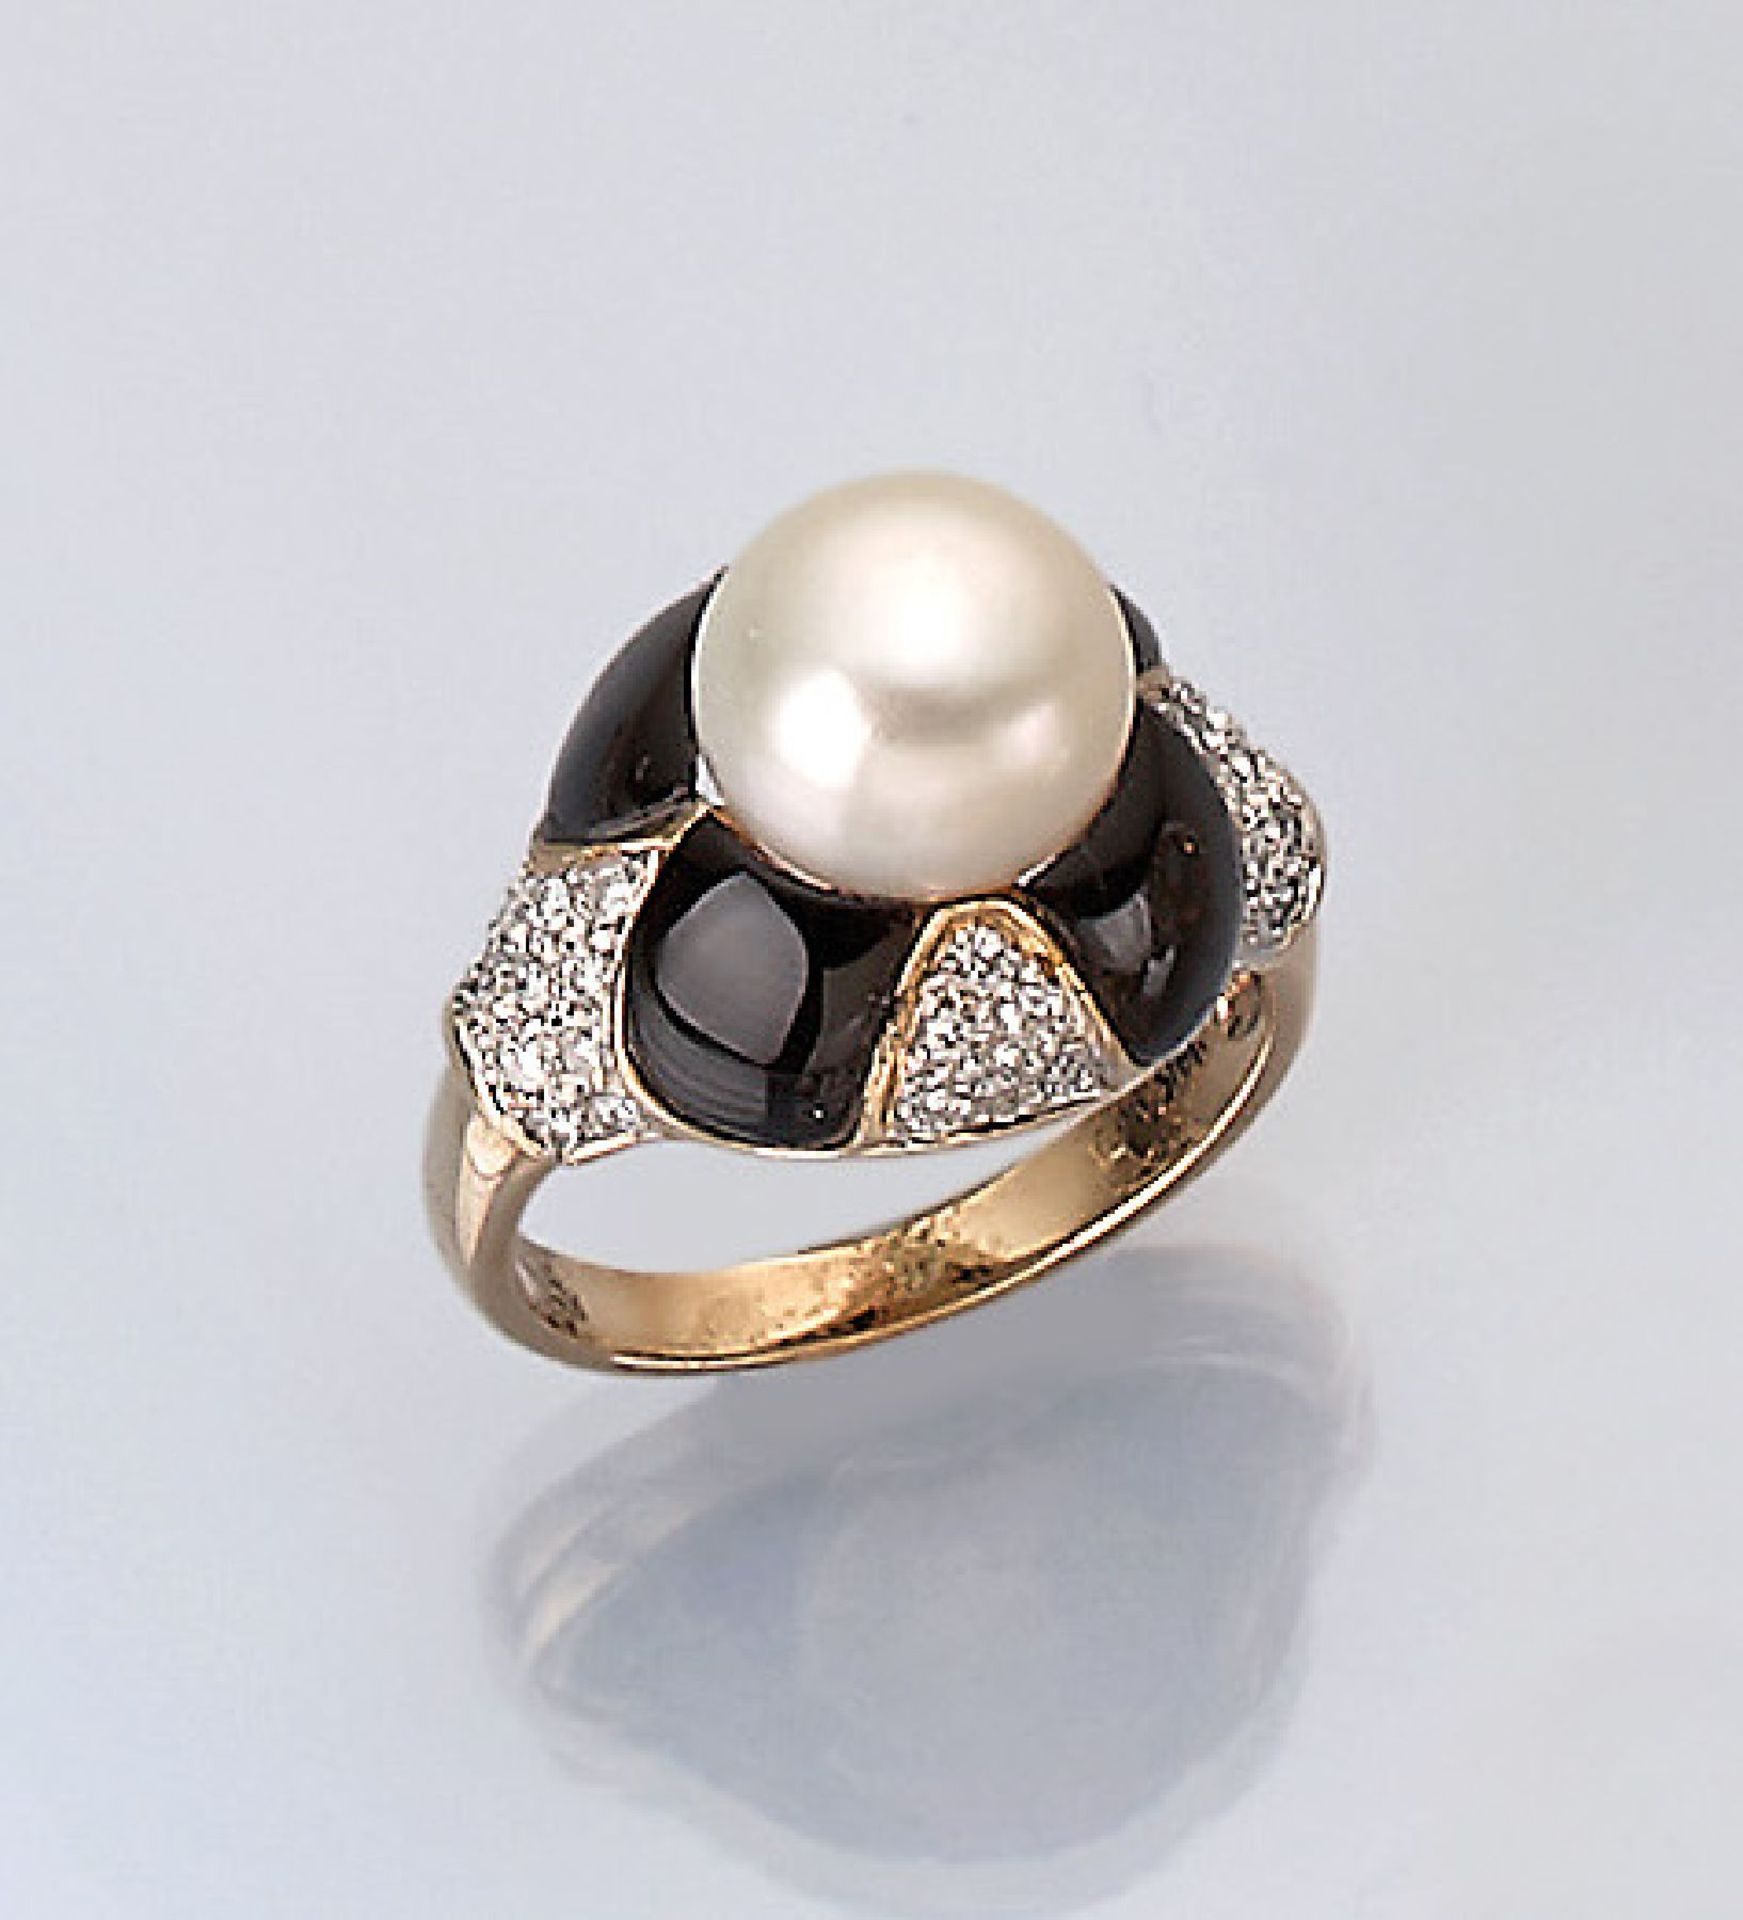 14 kt gold ring with brilliants, cultured pearls and enamel , YG 585/000, brilliants total approx.